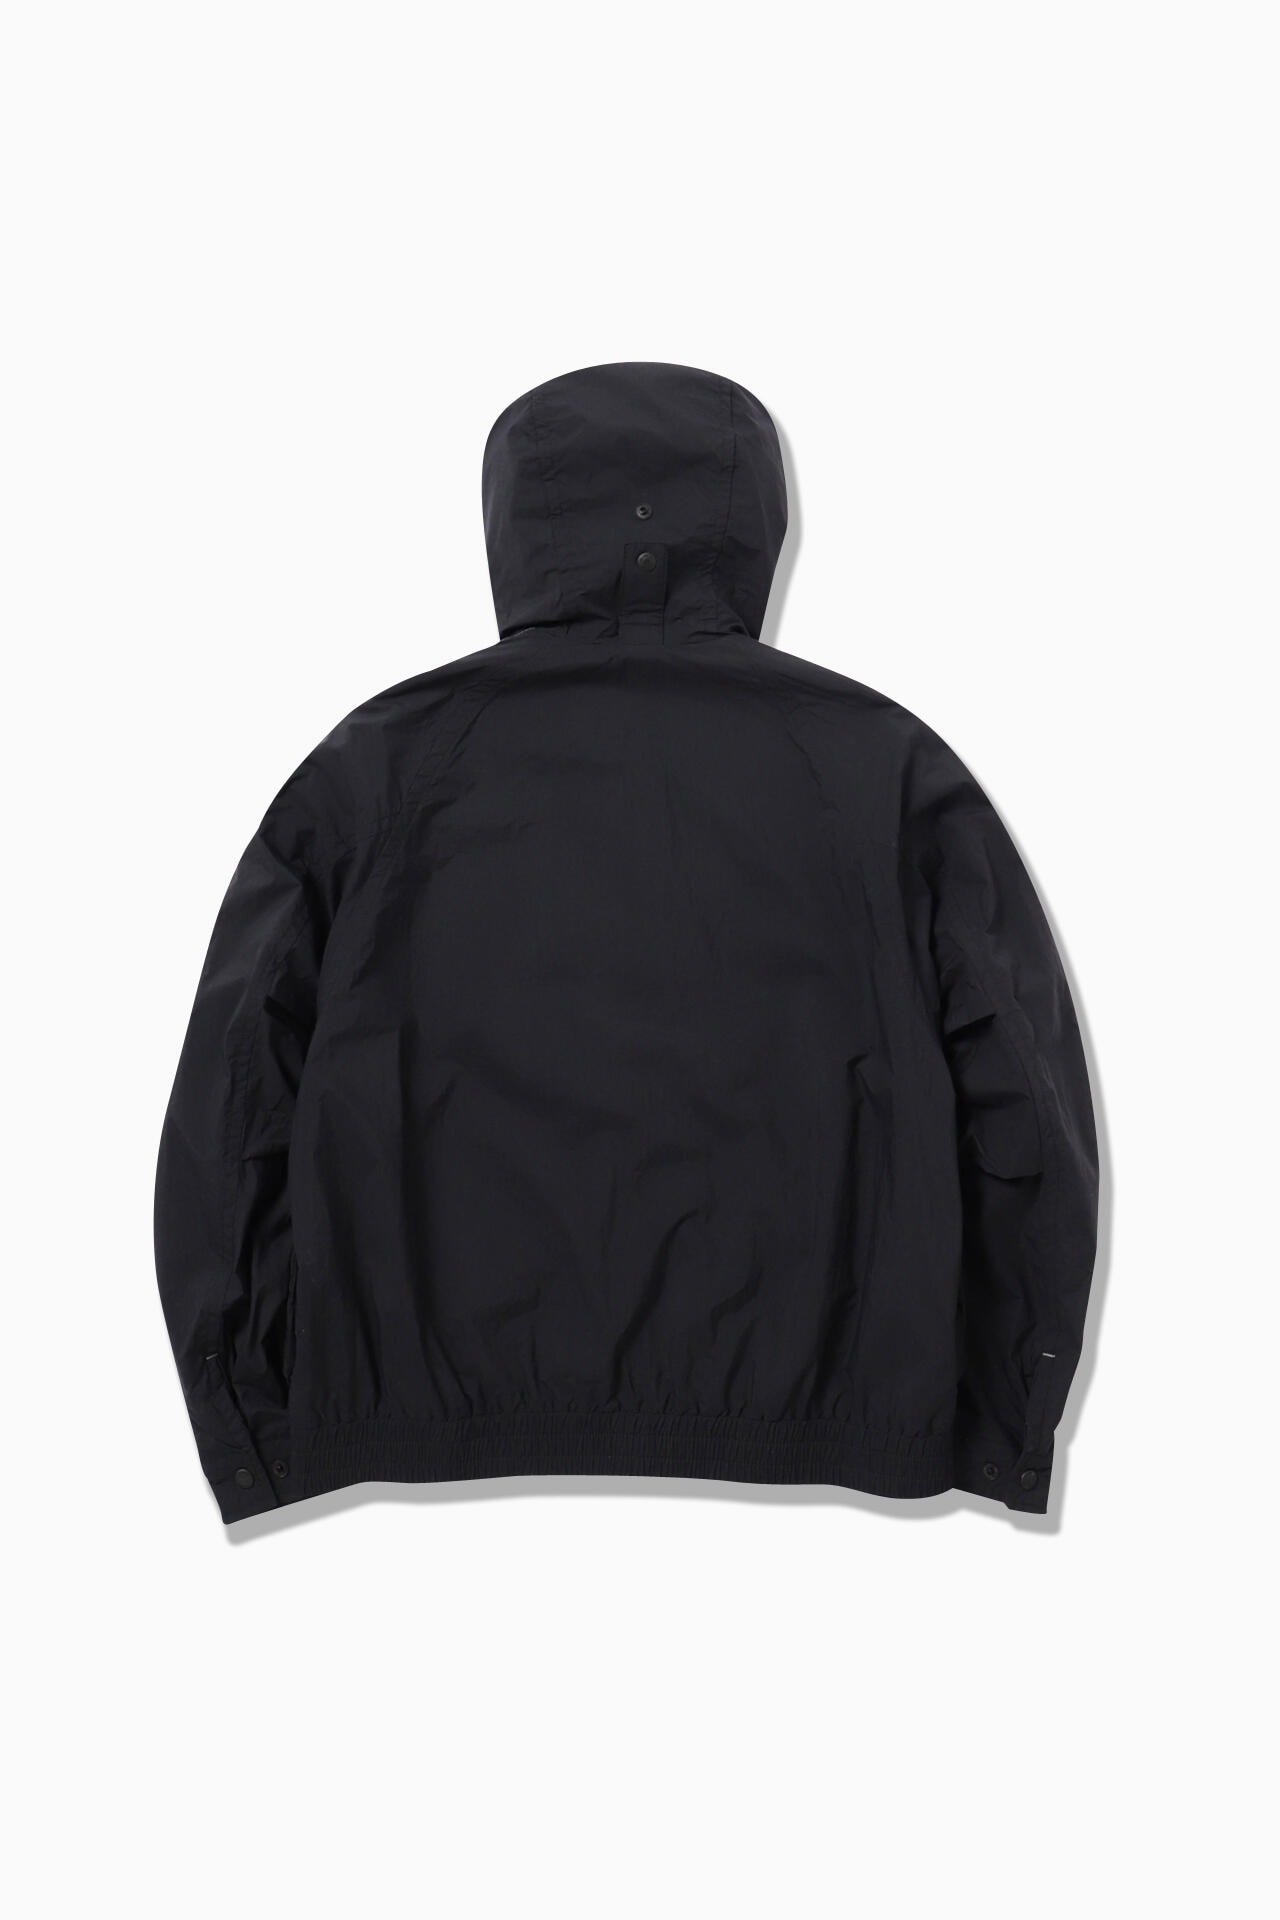 water repellent light jacket 2 | outerwear | and wander ONLINE STORE